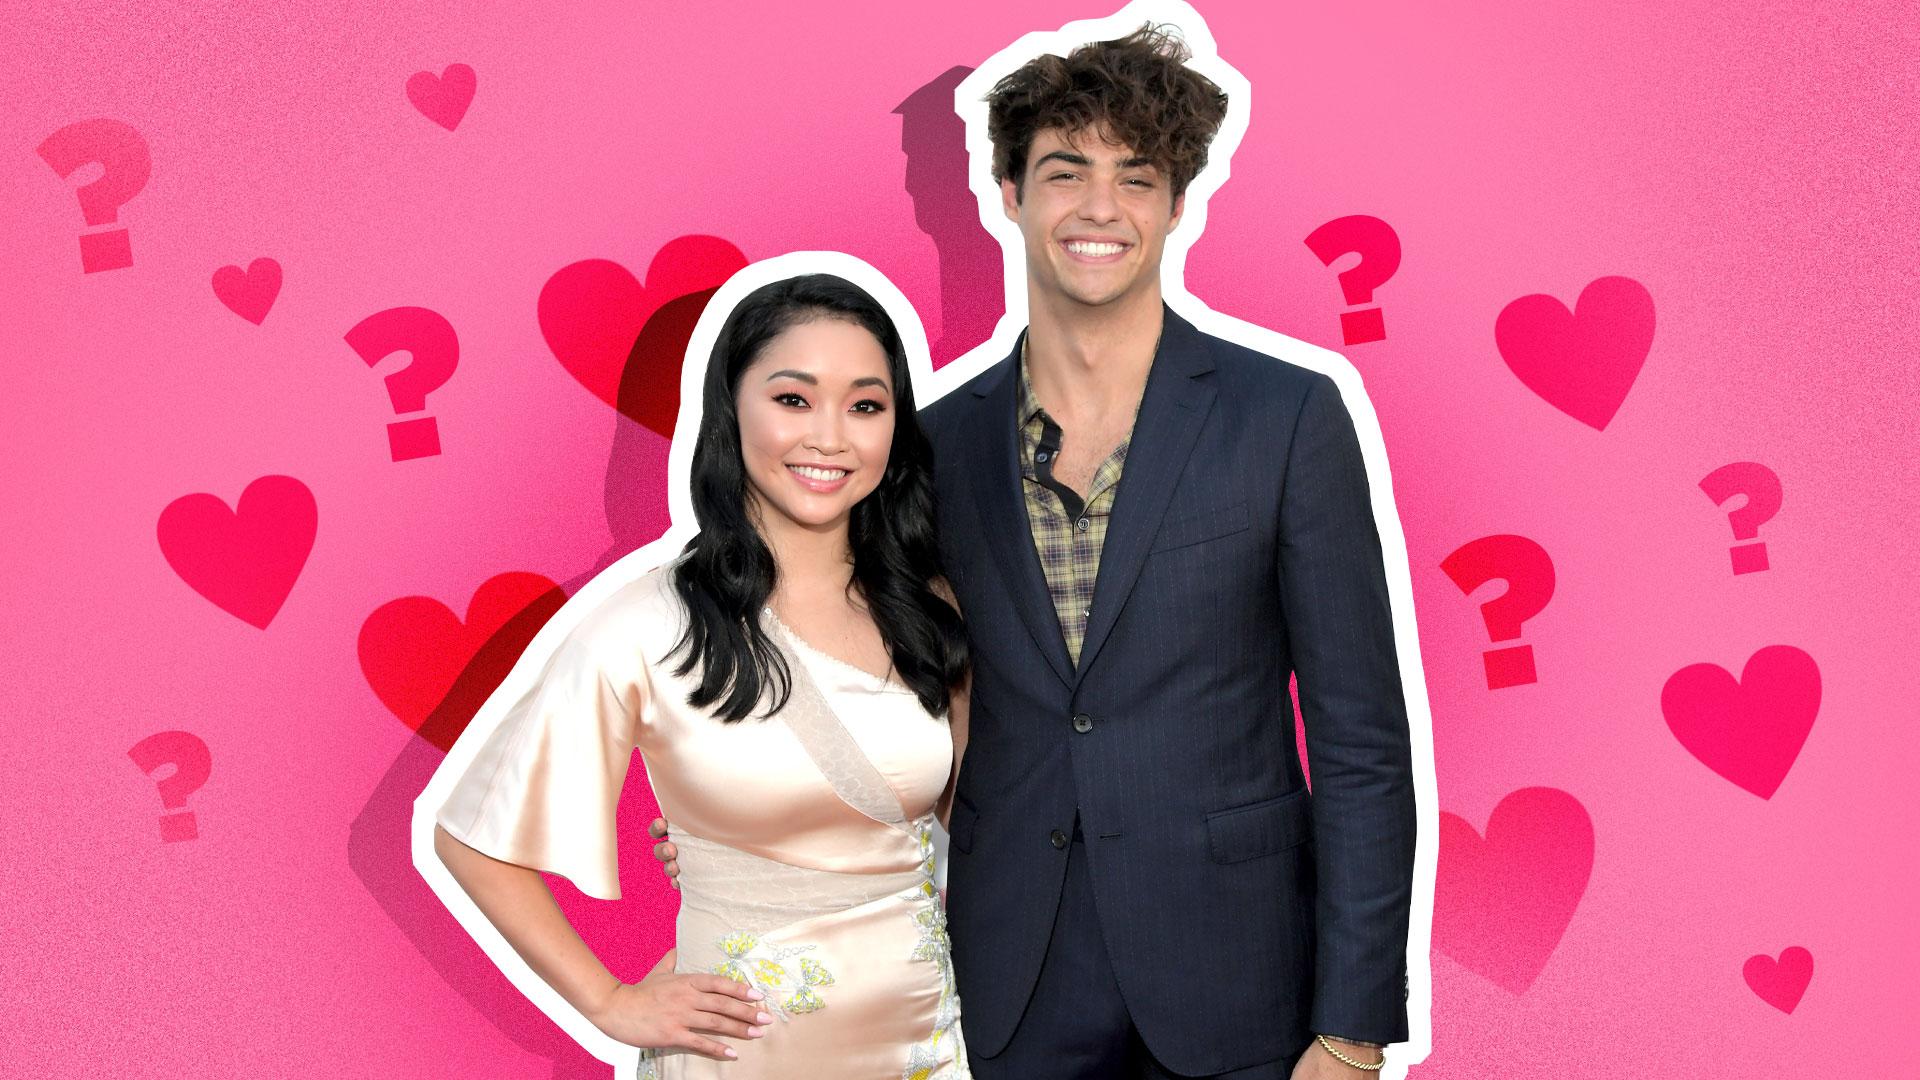 Are Noah Centineo & Lana Condor Dating? 'To All the Boys I've